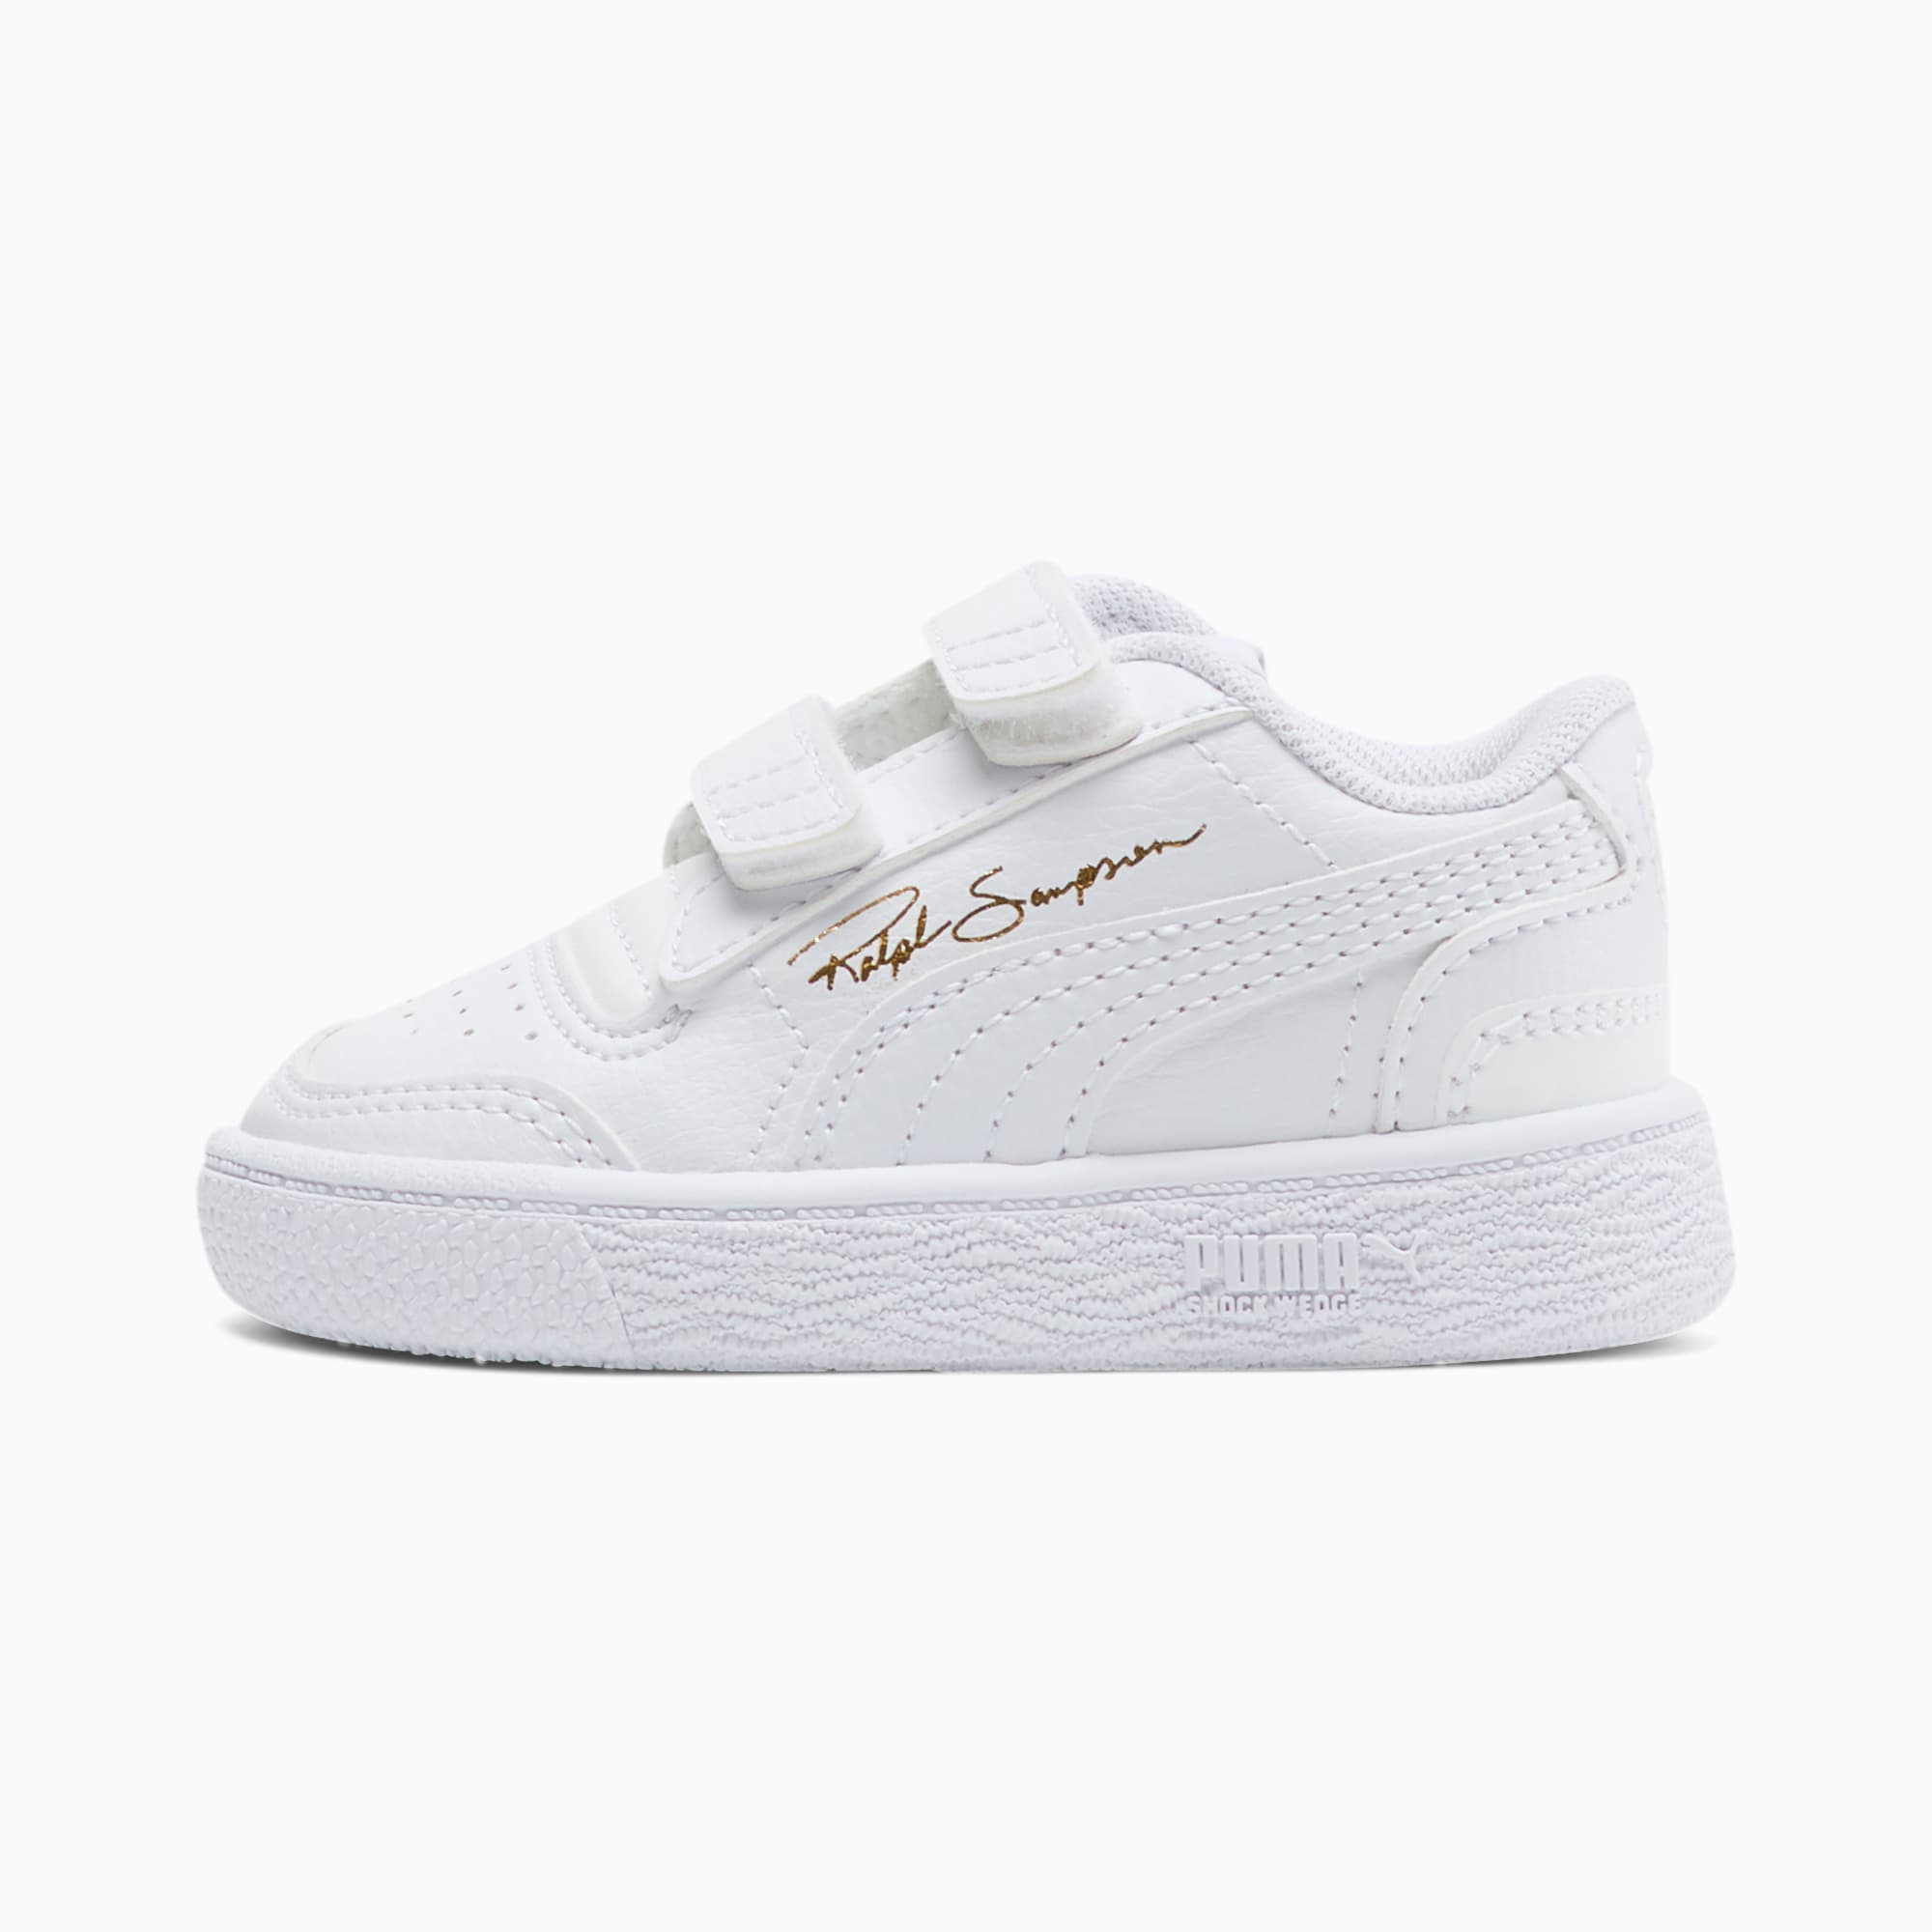 PUMA Chaussure Ralph Sampson Lo V babysneakers pour Enfant, Blanc, Taille 24, Chaussures